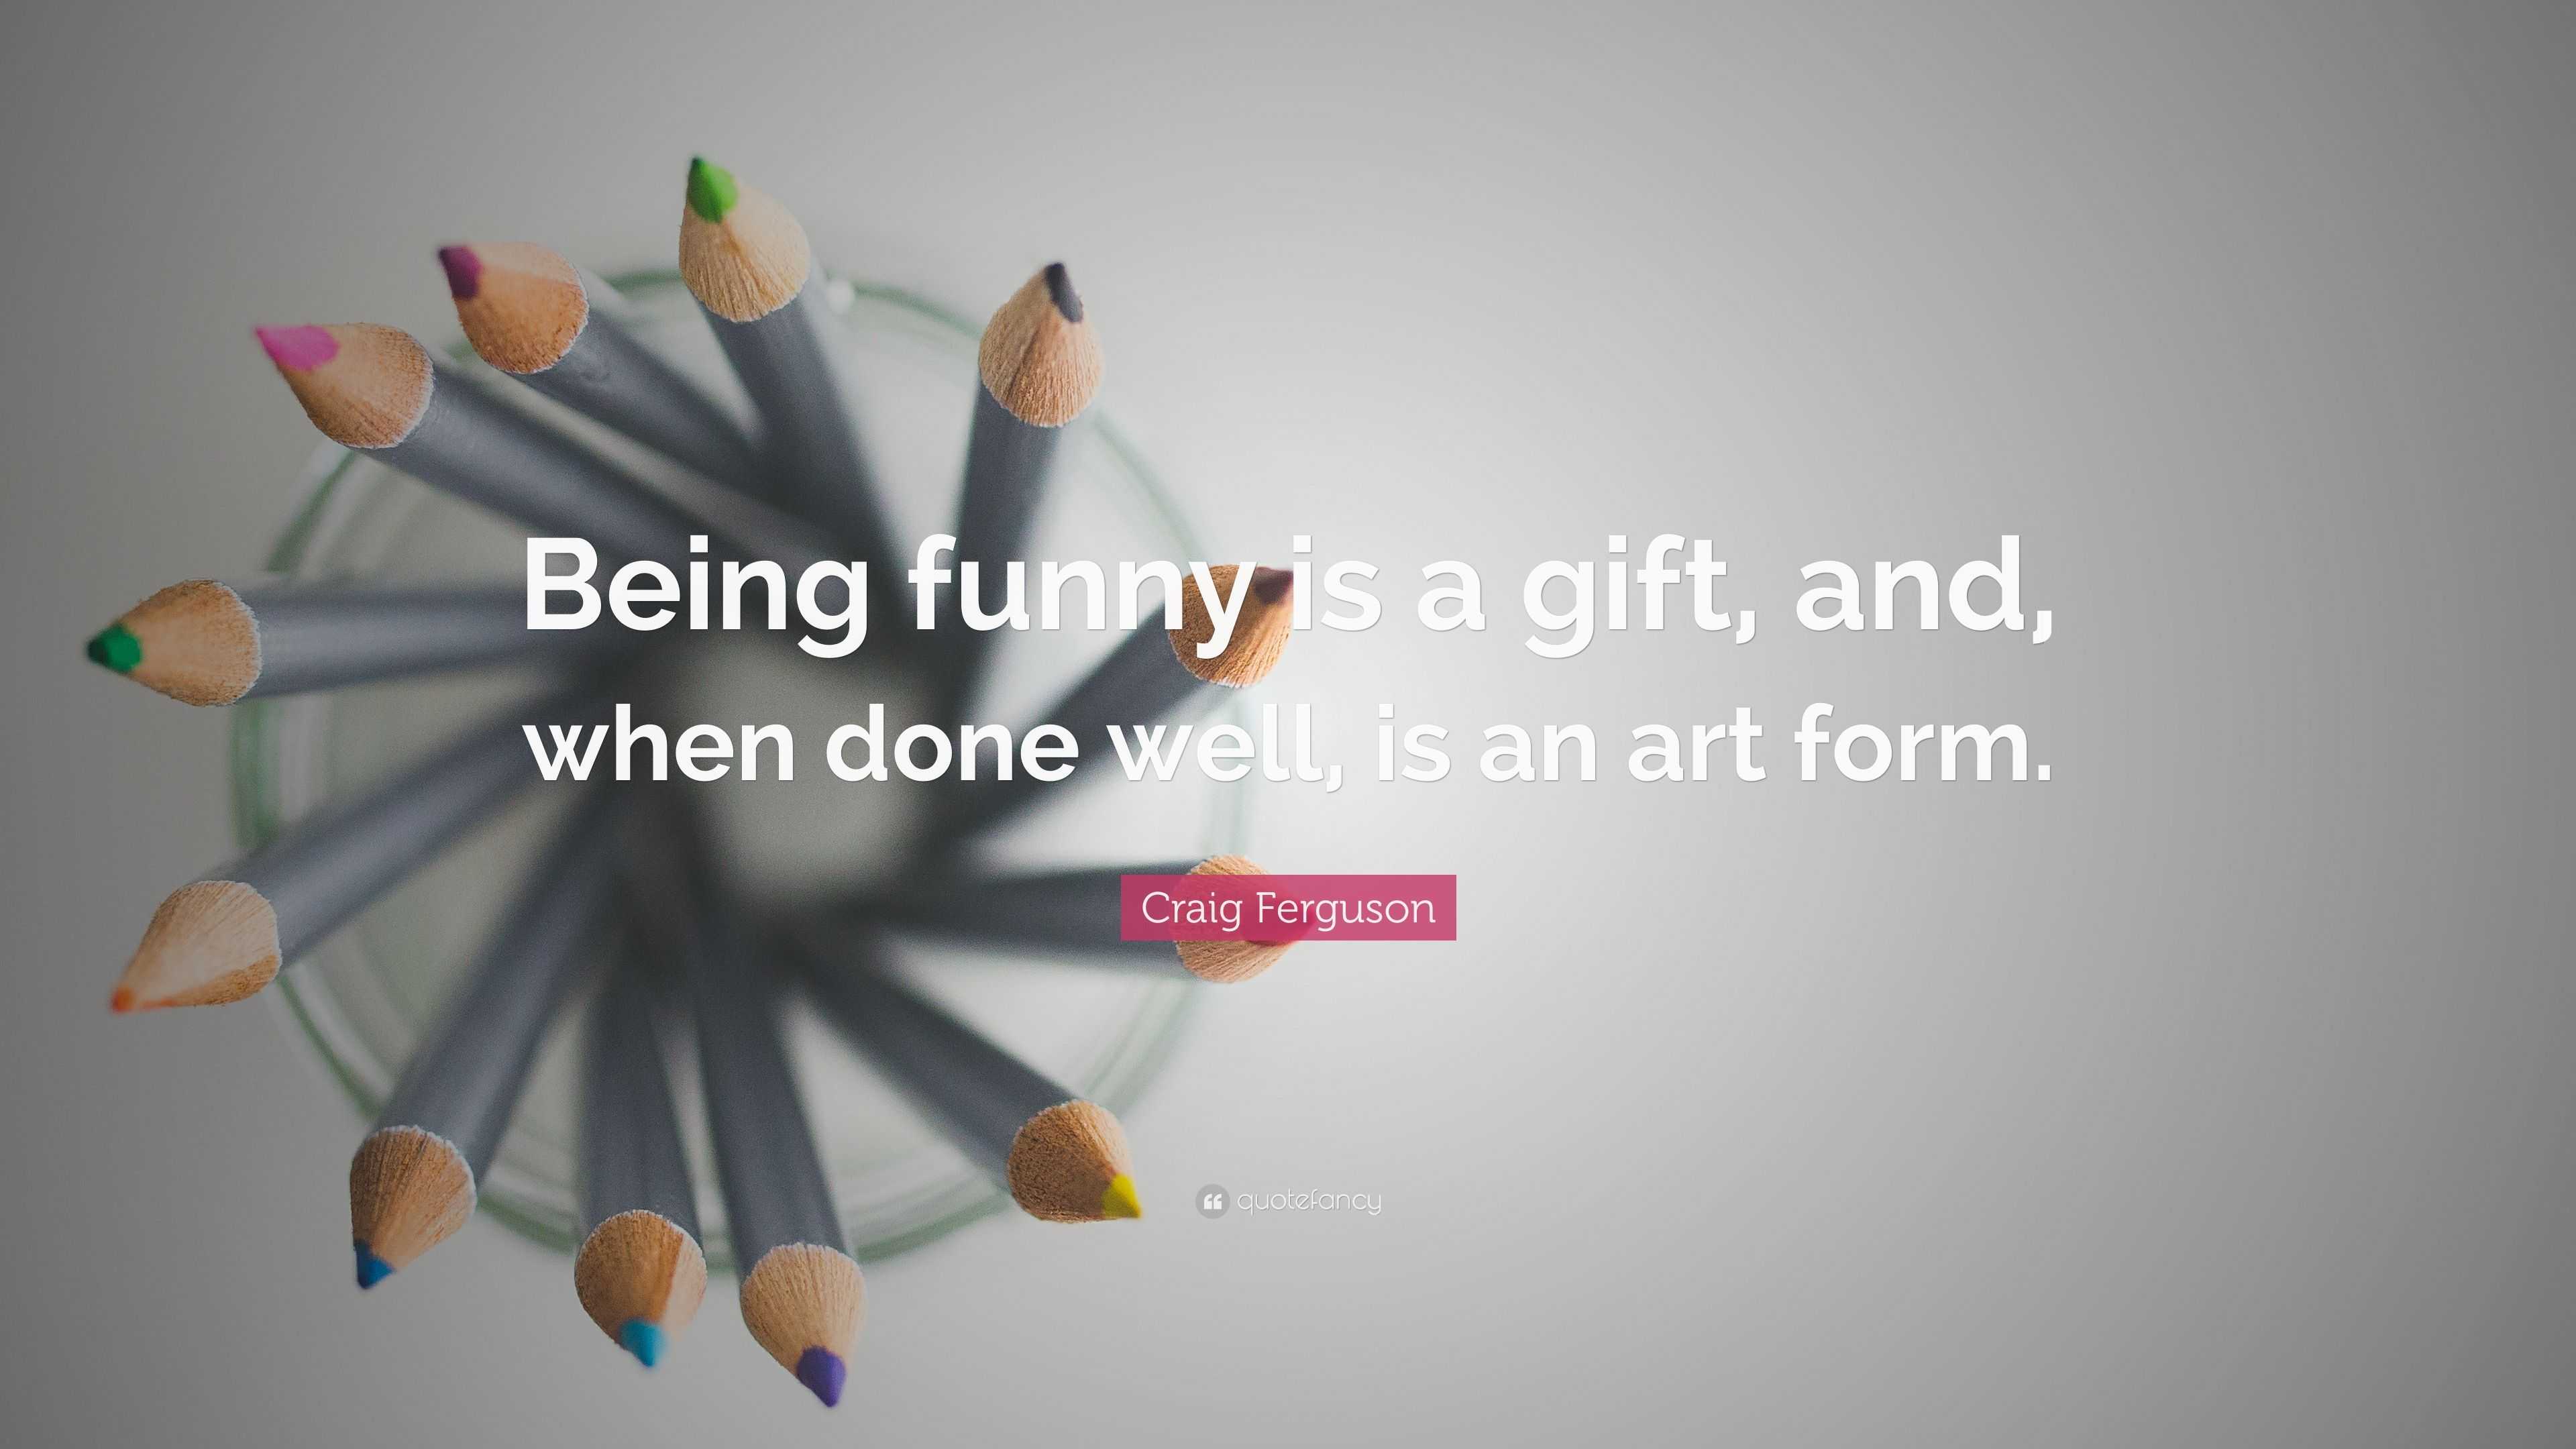 Craig Ferguson Quote: “Being funny is a gift, and, when done well, is an art  form.”